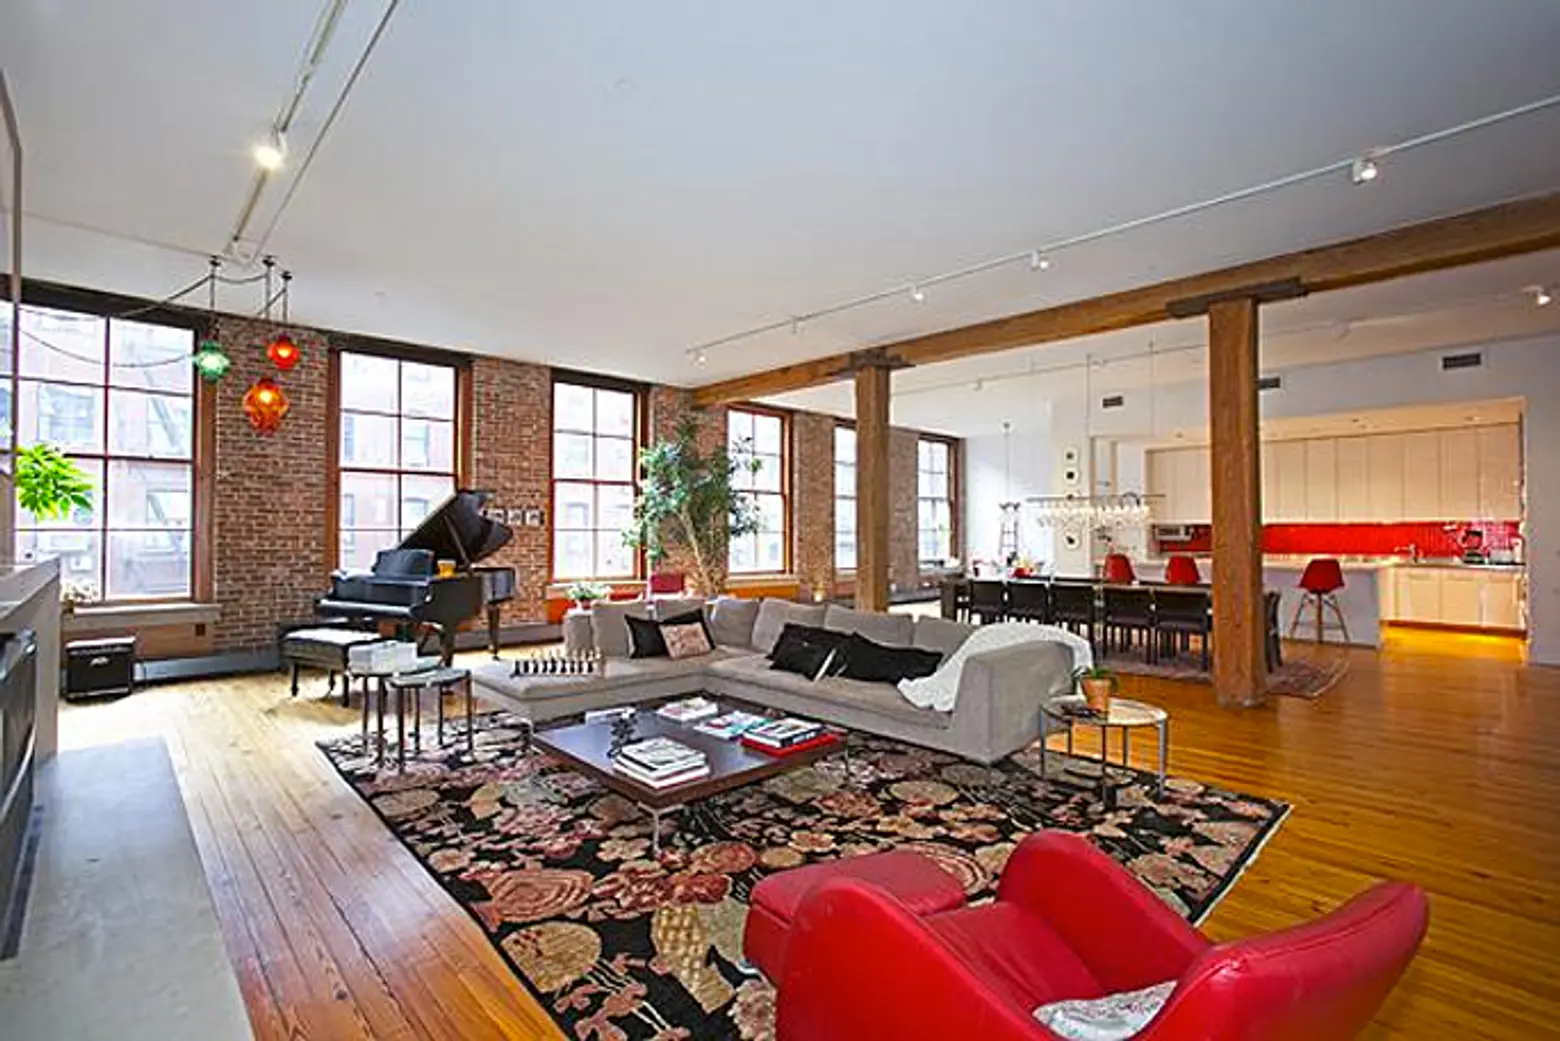 Loft in Former Celeb Haven at 30 Crosby Street Finds a Buyer for $7.8 Million